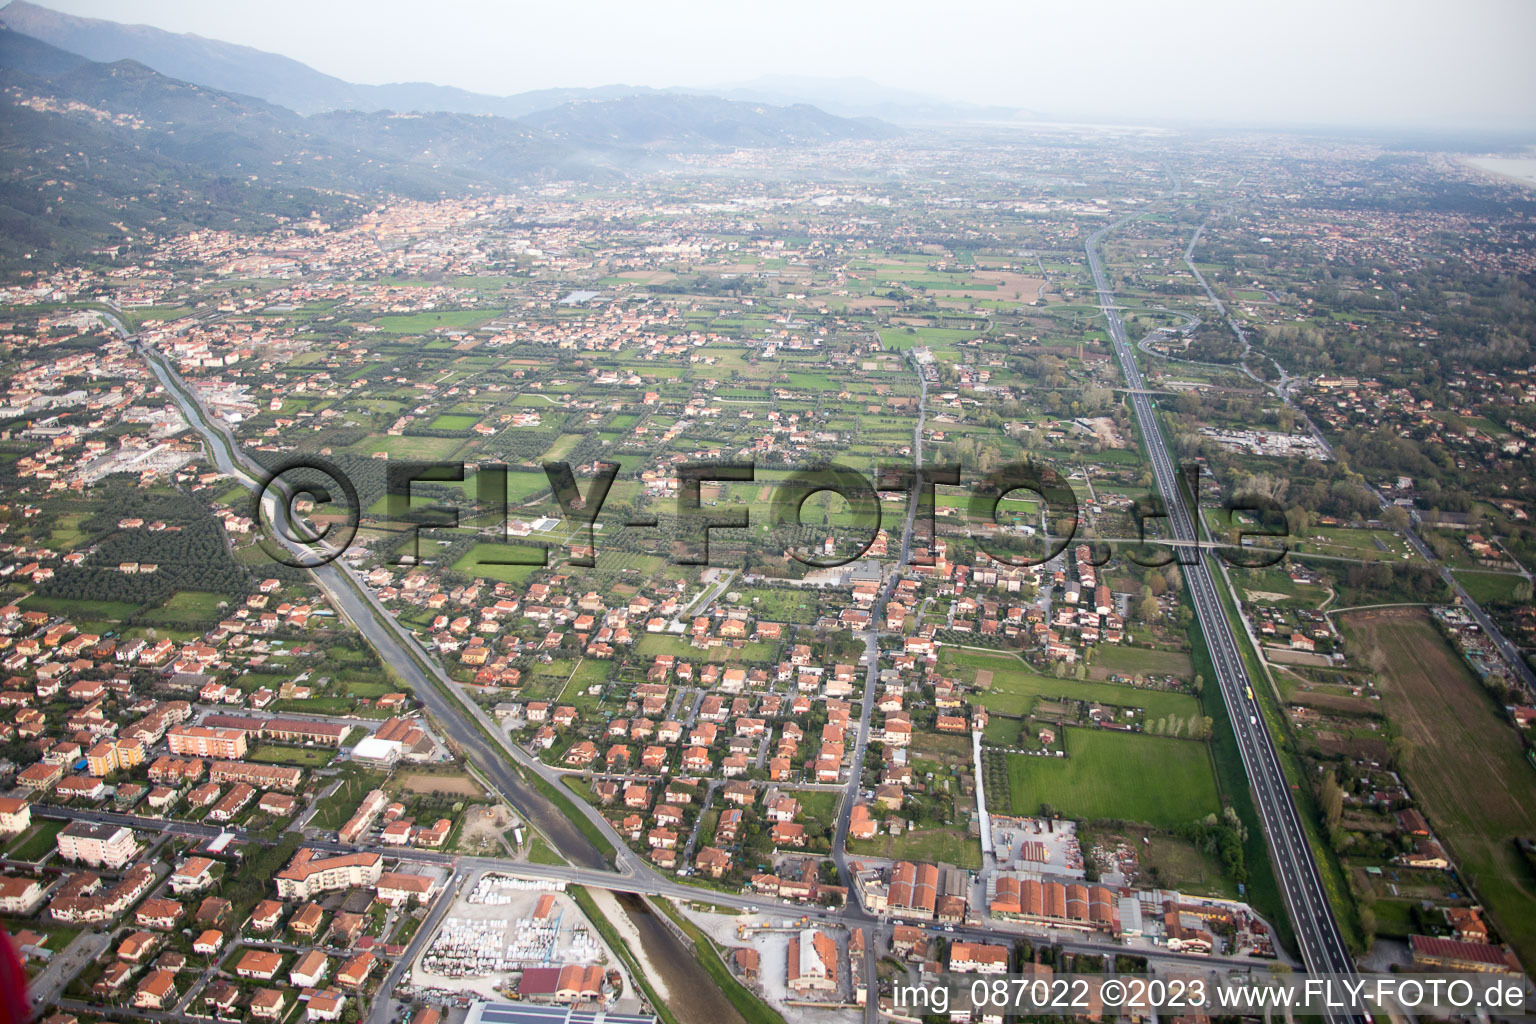 Aerial view of Federigi in the state Tuscany, Italy